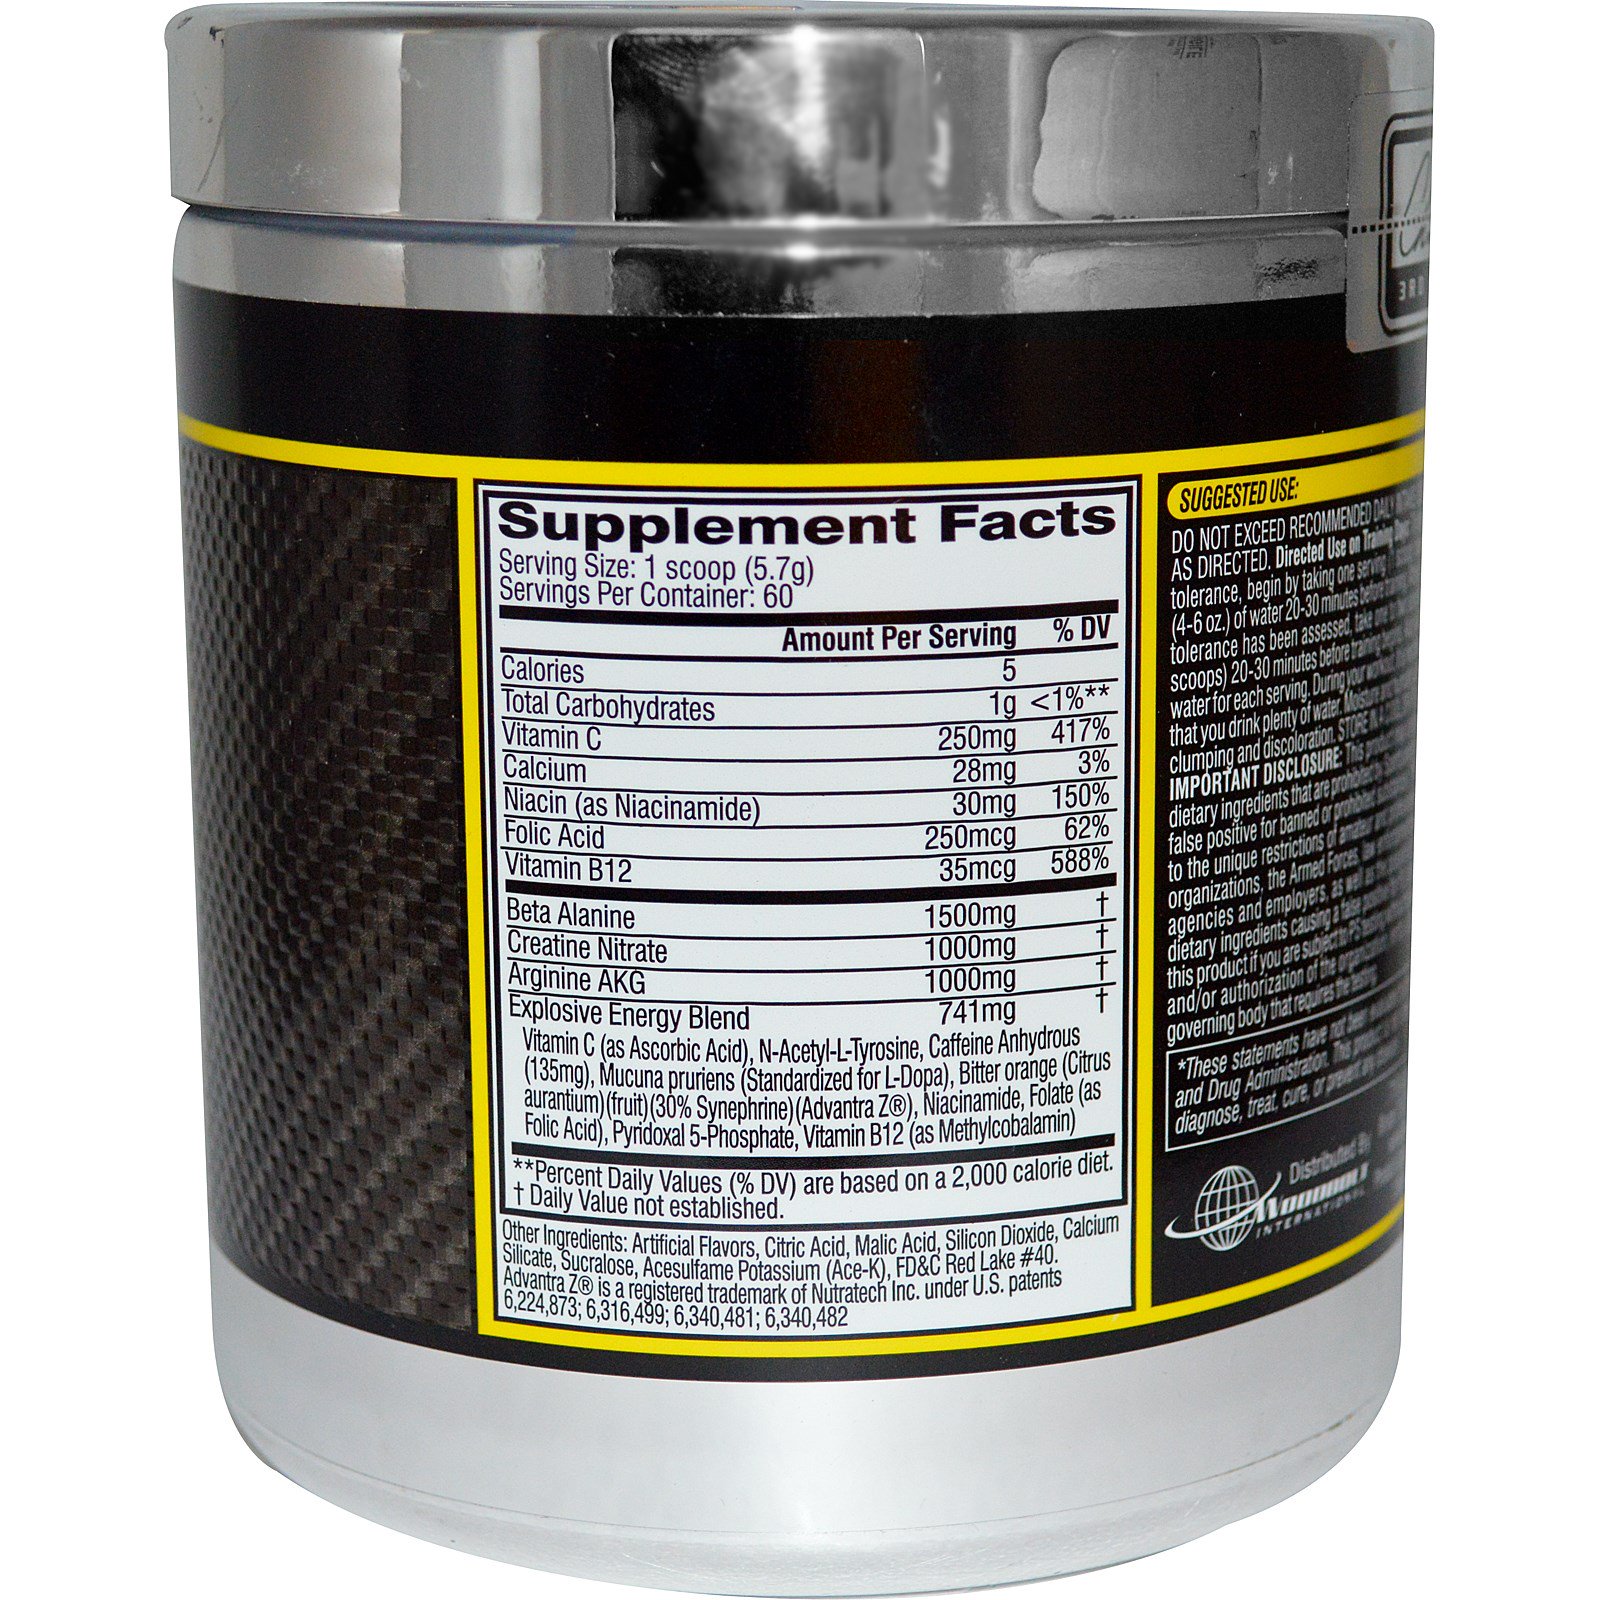  C4 Pre Workout Ingredients Caffeine for Burn Fat fast